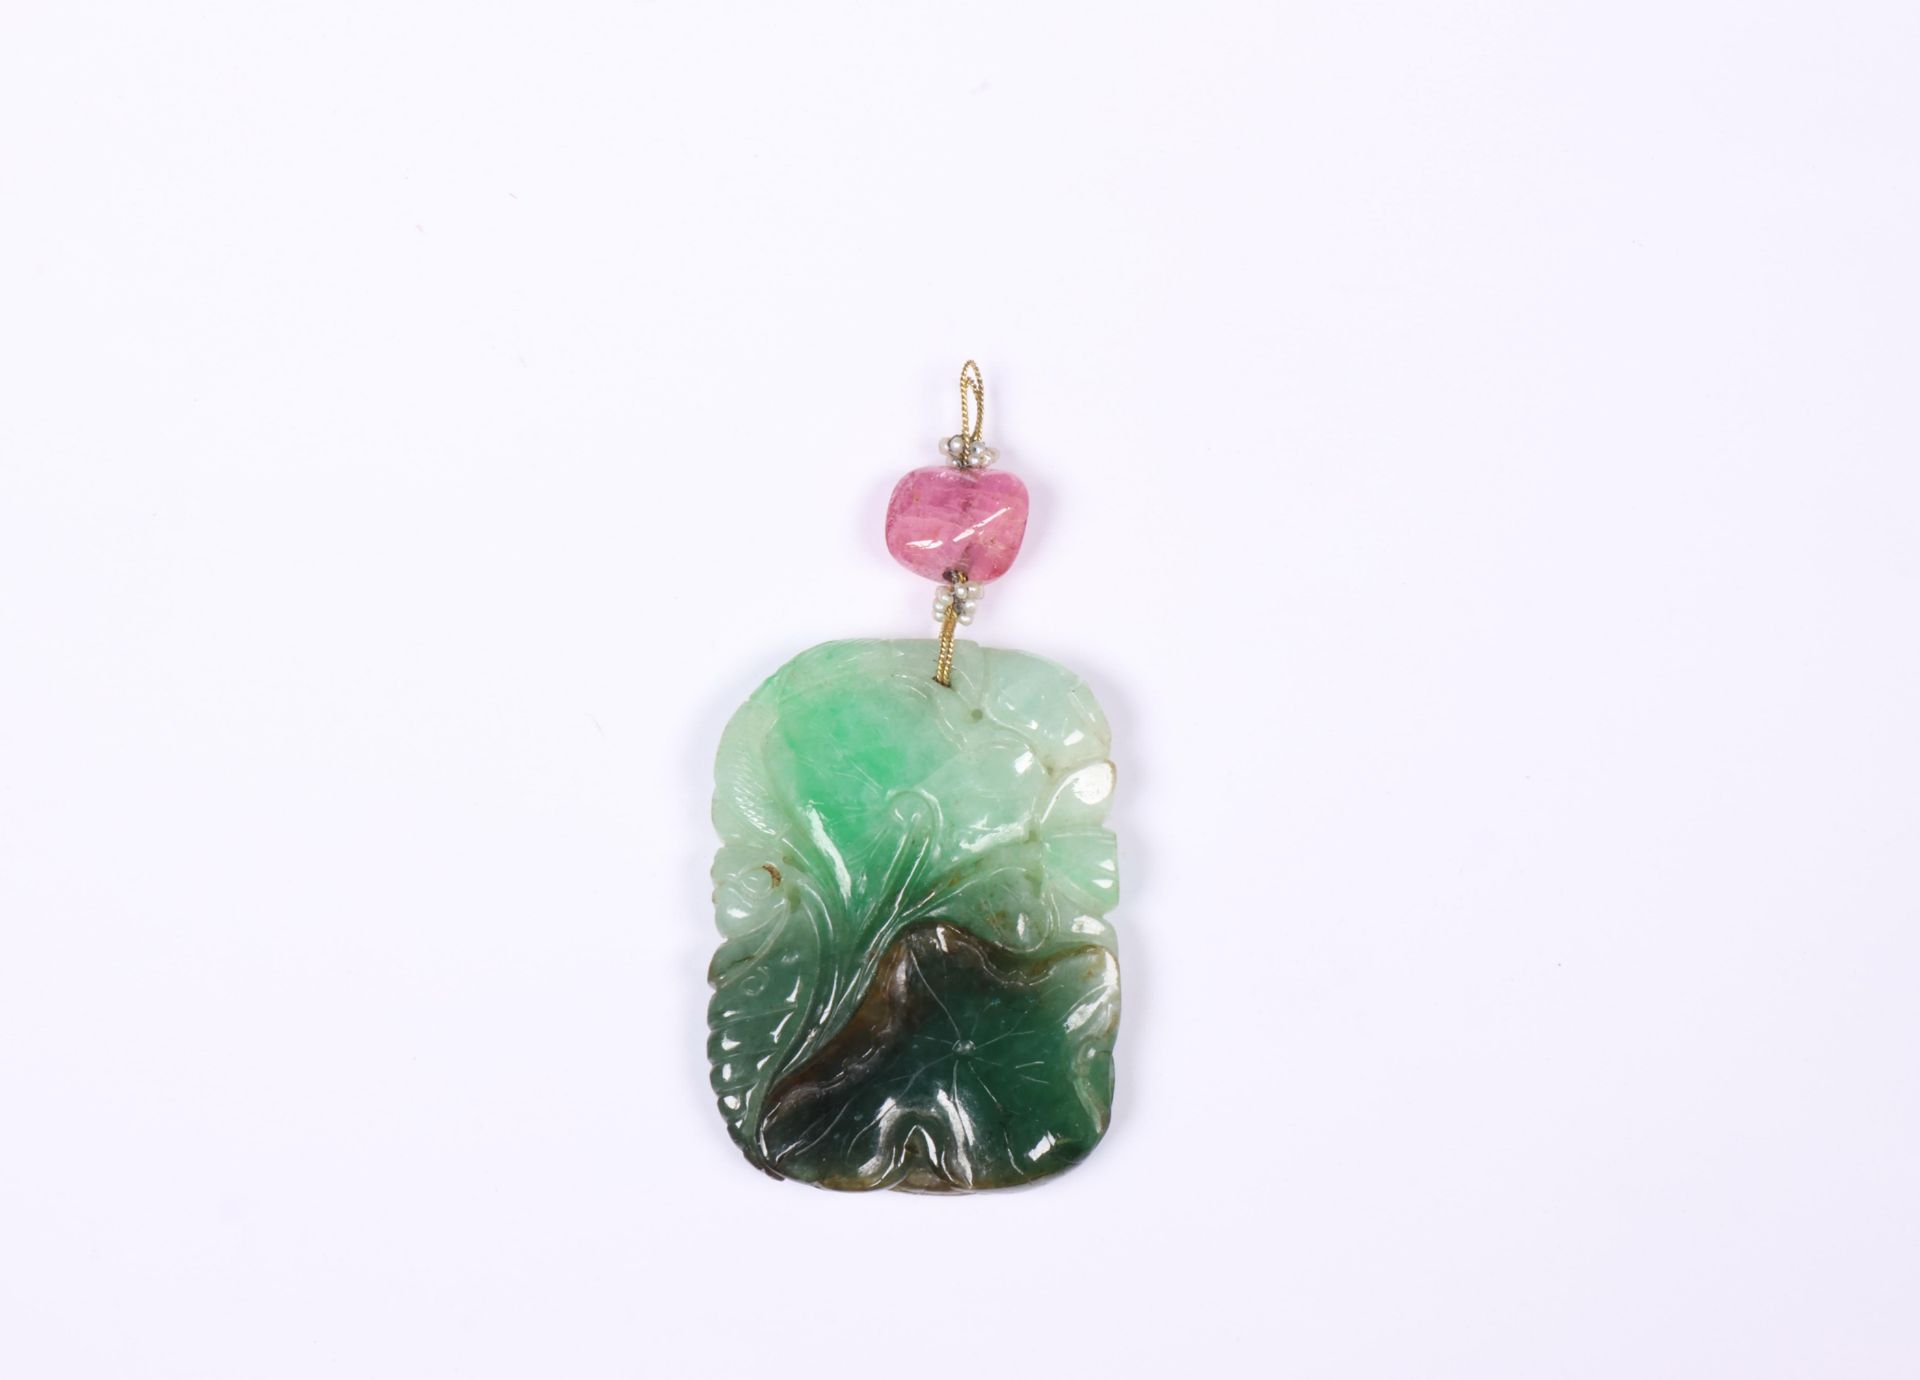 China, jadeite pendant with seed pearls and pink tourmaline bead,